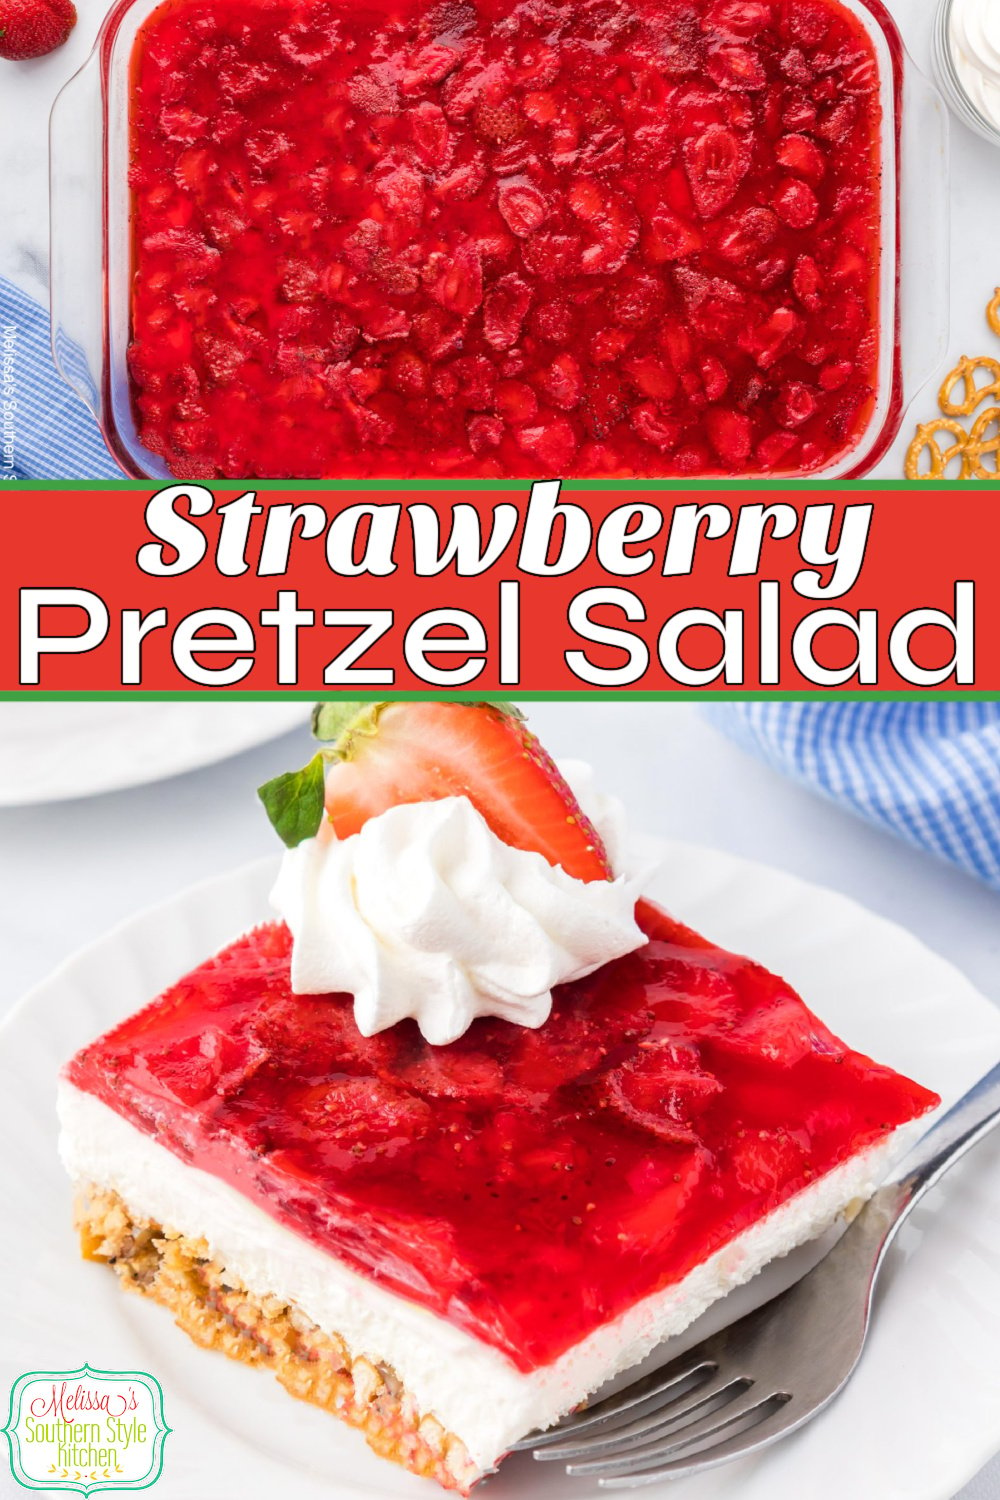 Strawberry Pretzel Salad features layers of strawberry jello, a cheesecake-like layer with a buttery pretzel pecan crust as the base. #strawberries #strawberrysalad #strawberryrecipes #salads #saladrecipes #strawberrydessertrecipes #easypretzelsalad via @melissasssk